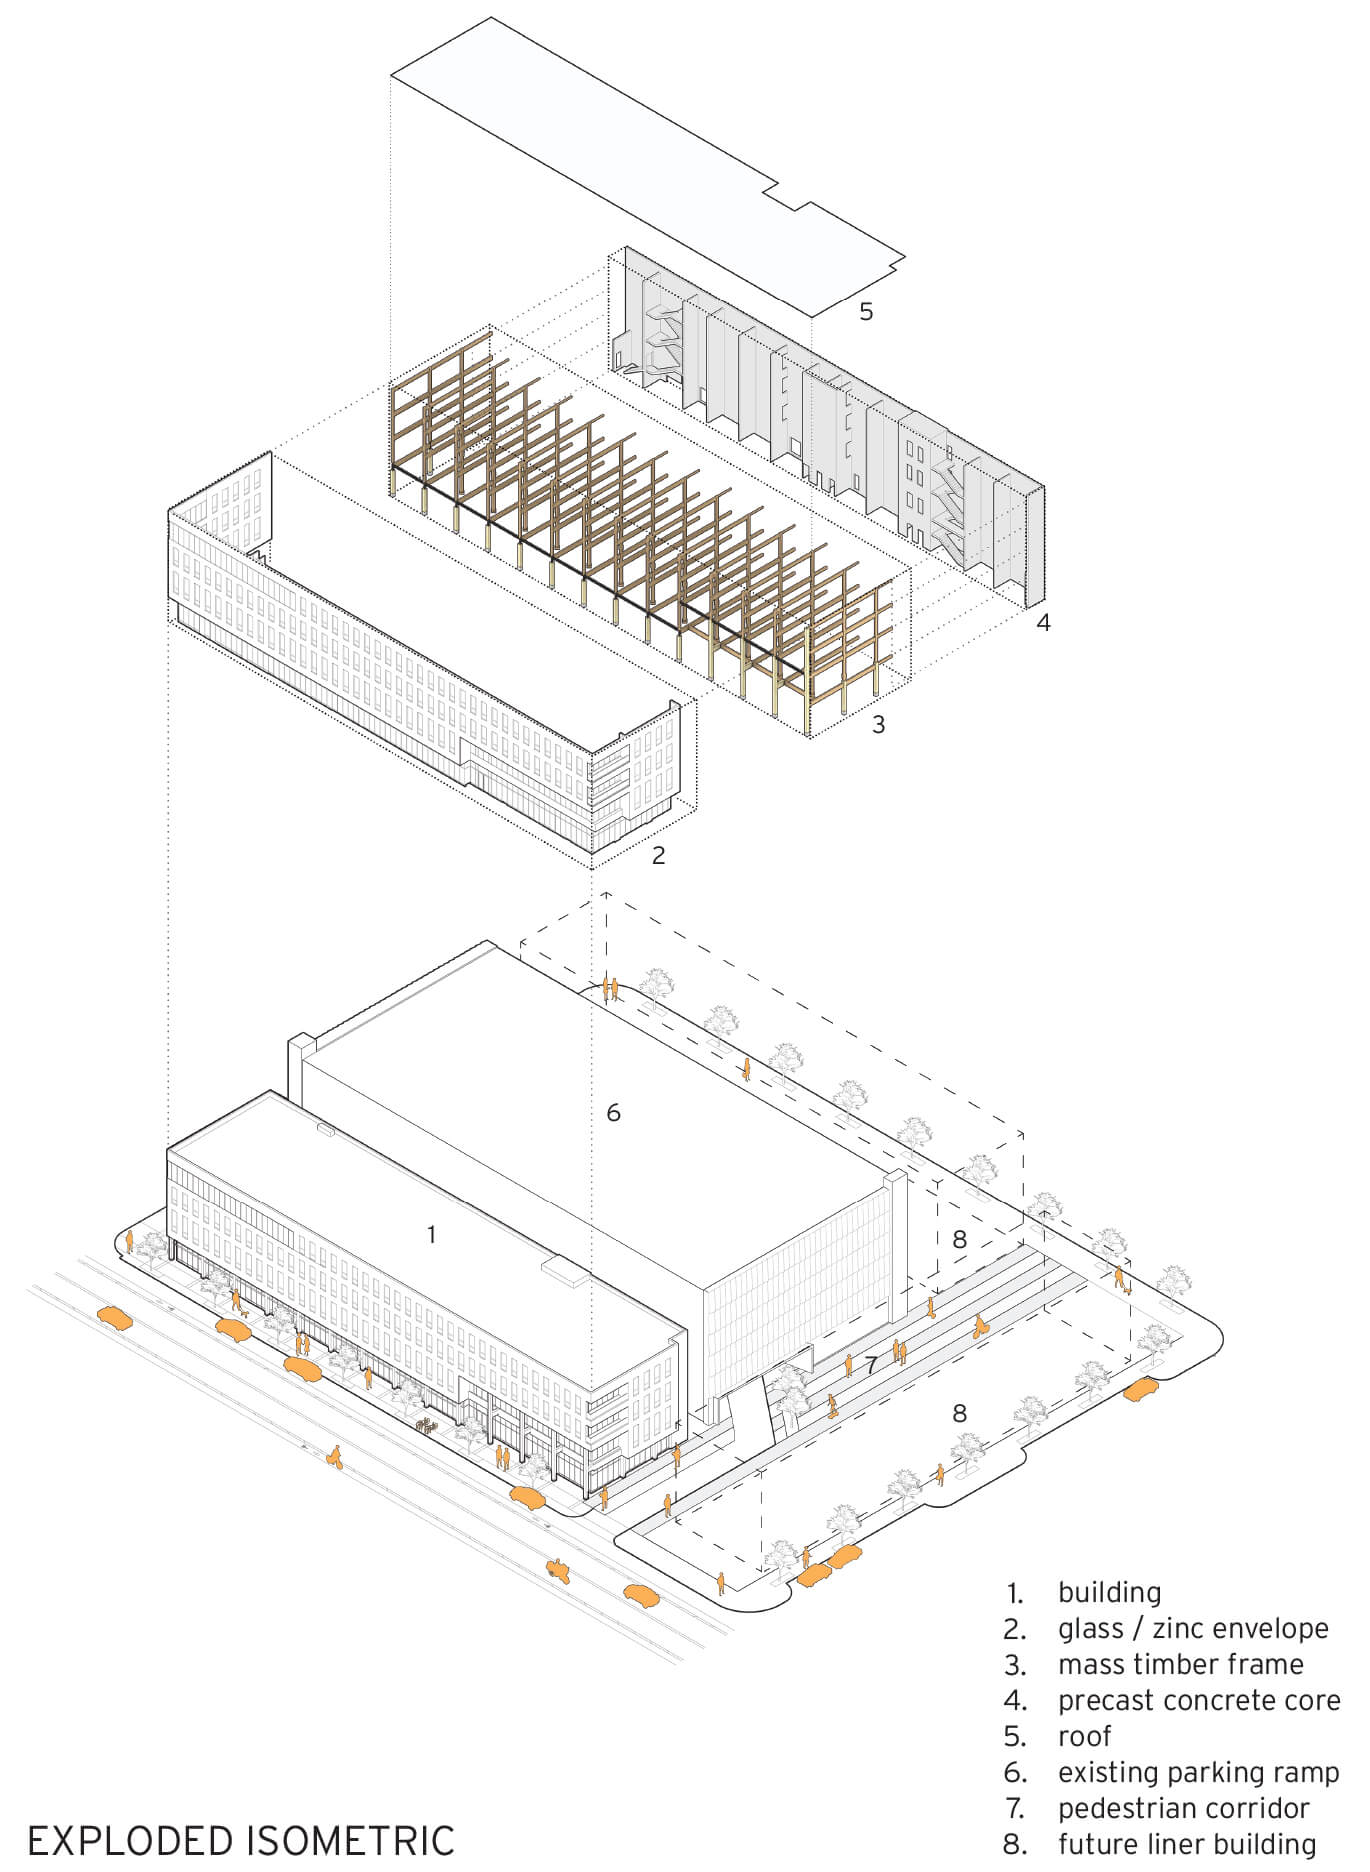 Exploded technical diagram of a timber and glass mixed-use structure